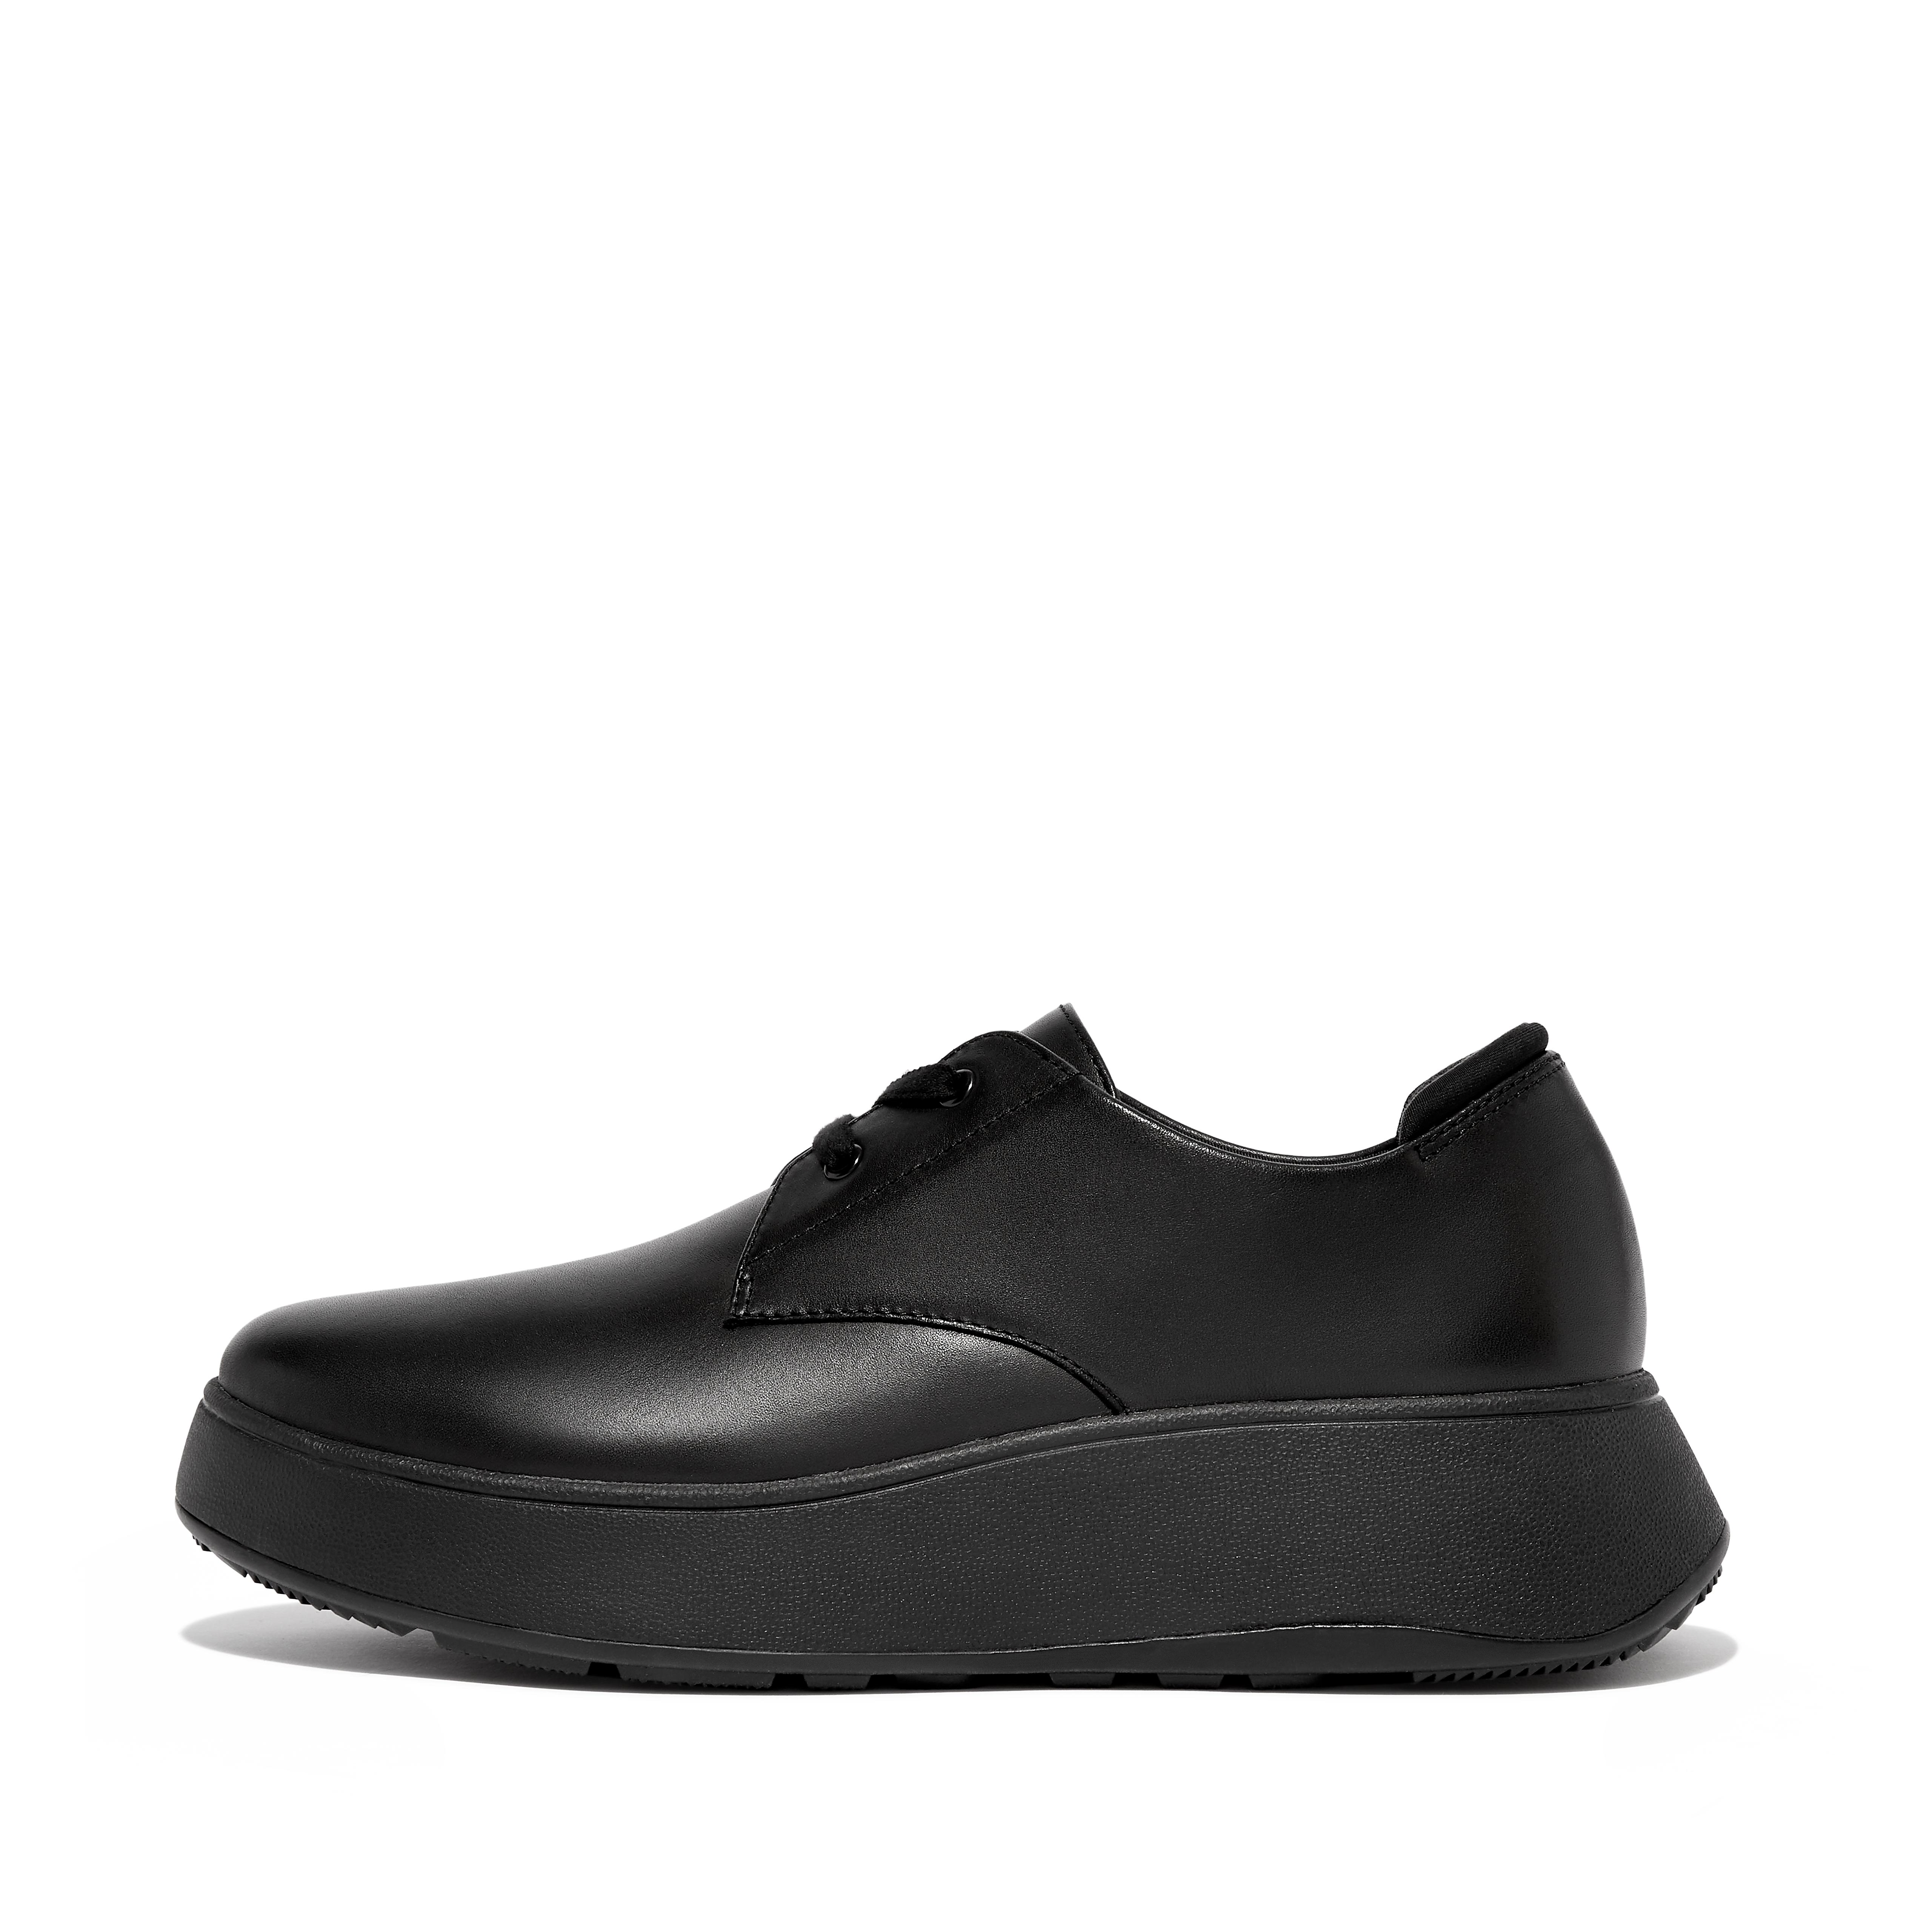 Fitflop Leather Flatform Lace-Up Derbies